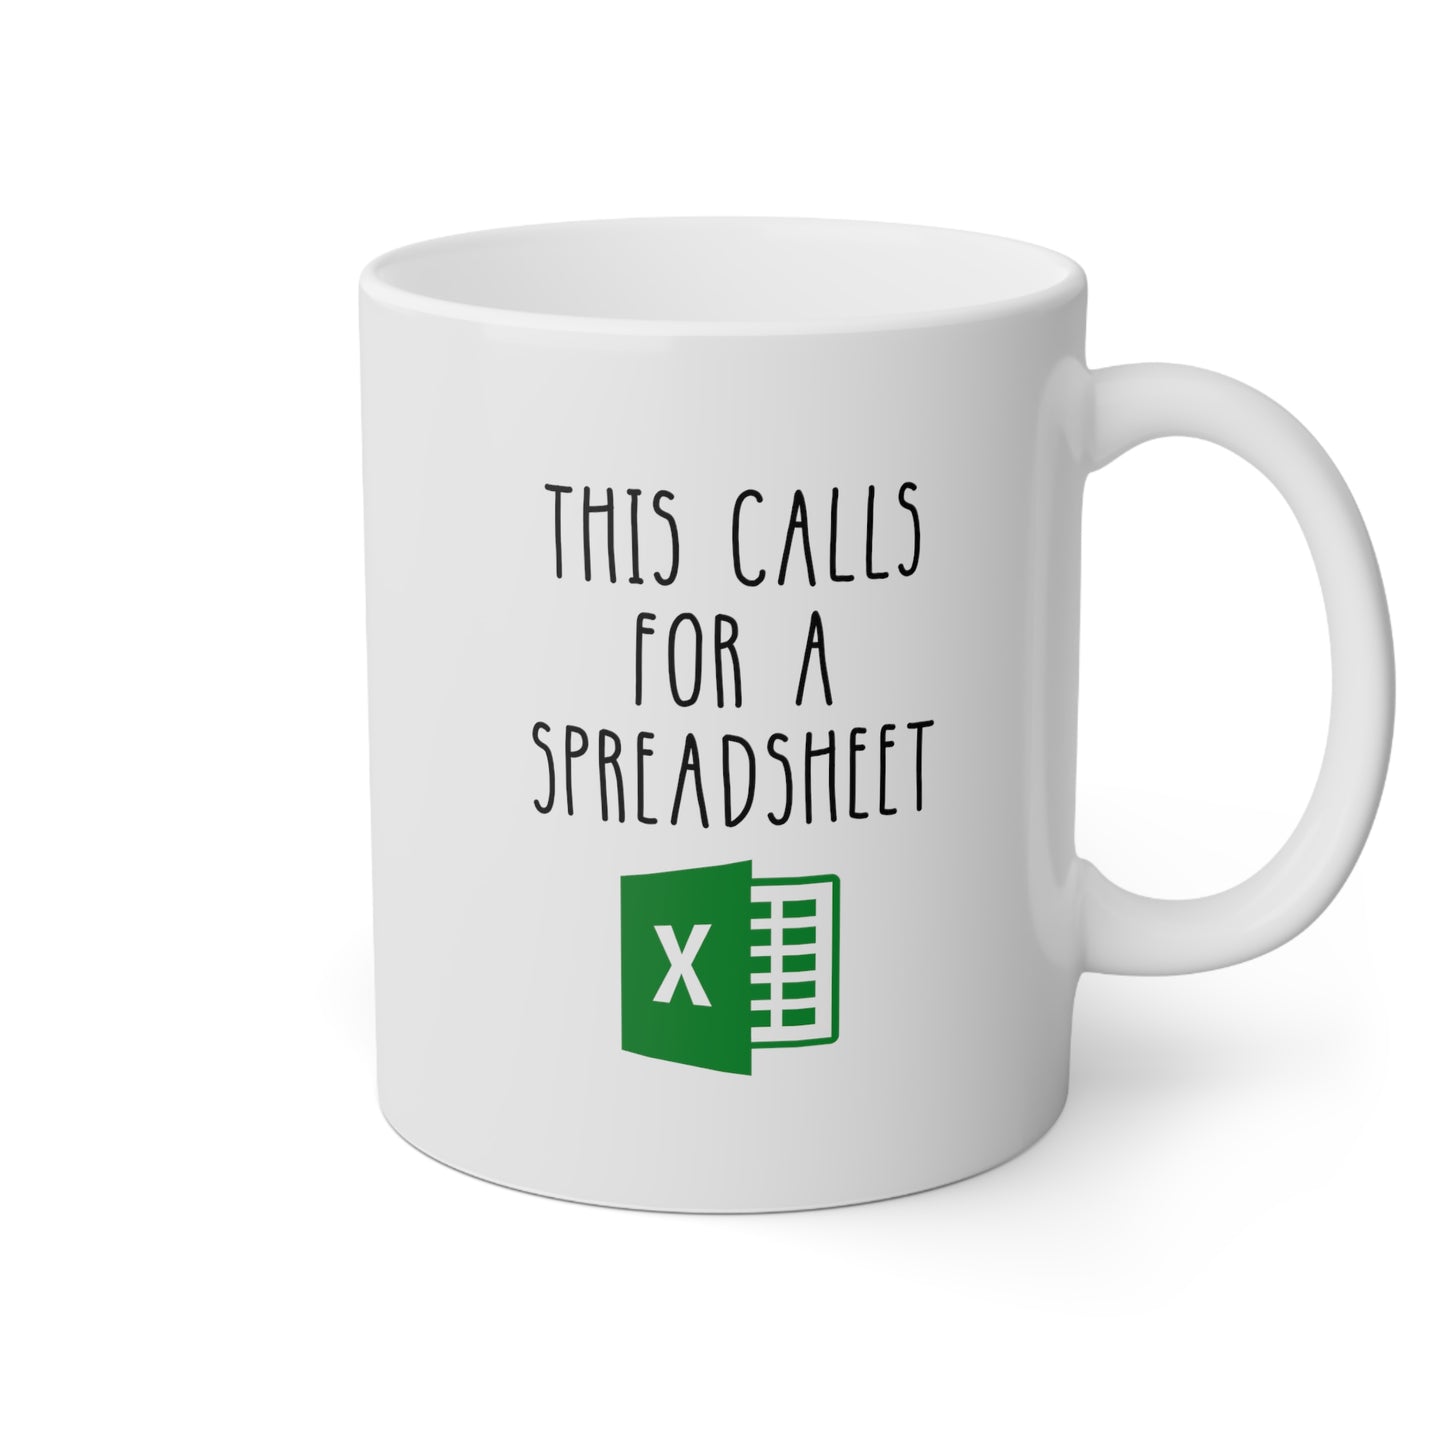 This Calls For A Spreadsheet 11oz white funny large coffee mug gift for coworker office decor excel accountant accounting waveywares wavey wares wavywares wavy wares